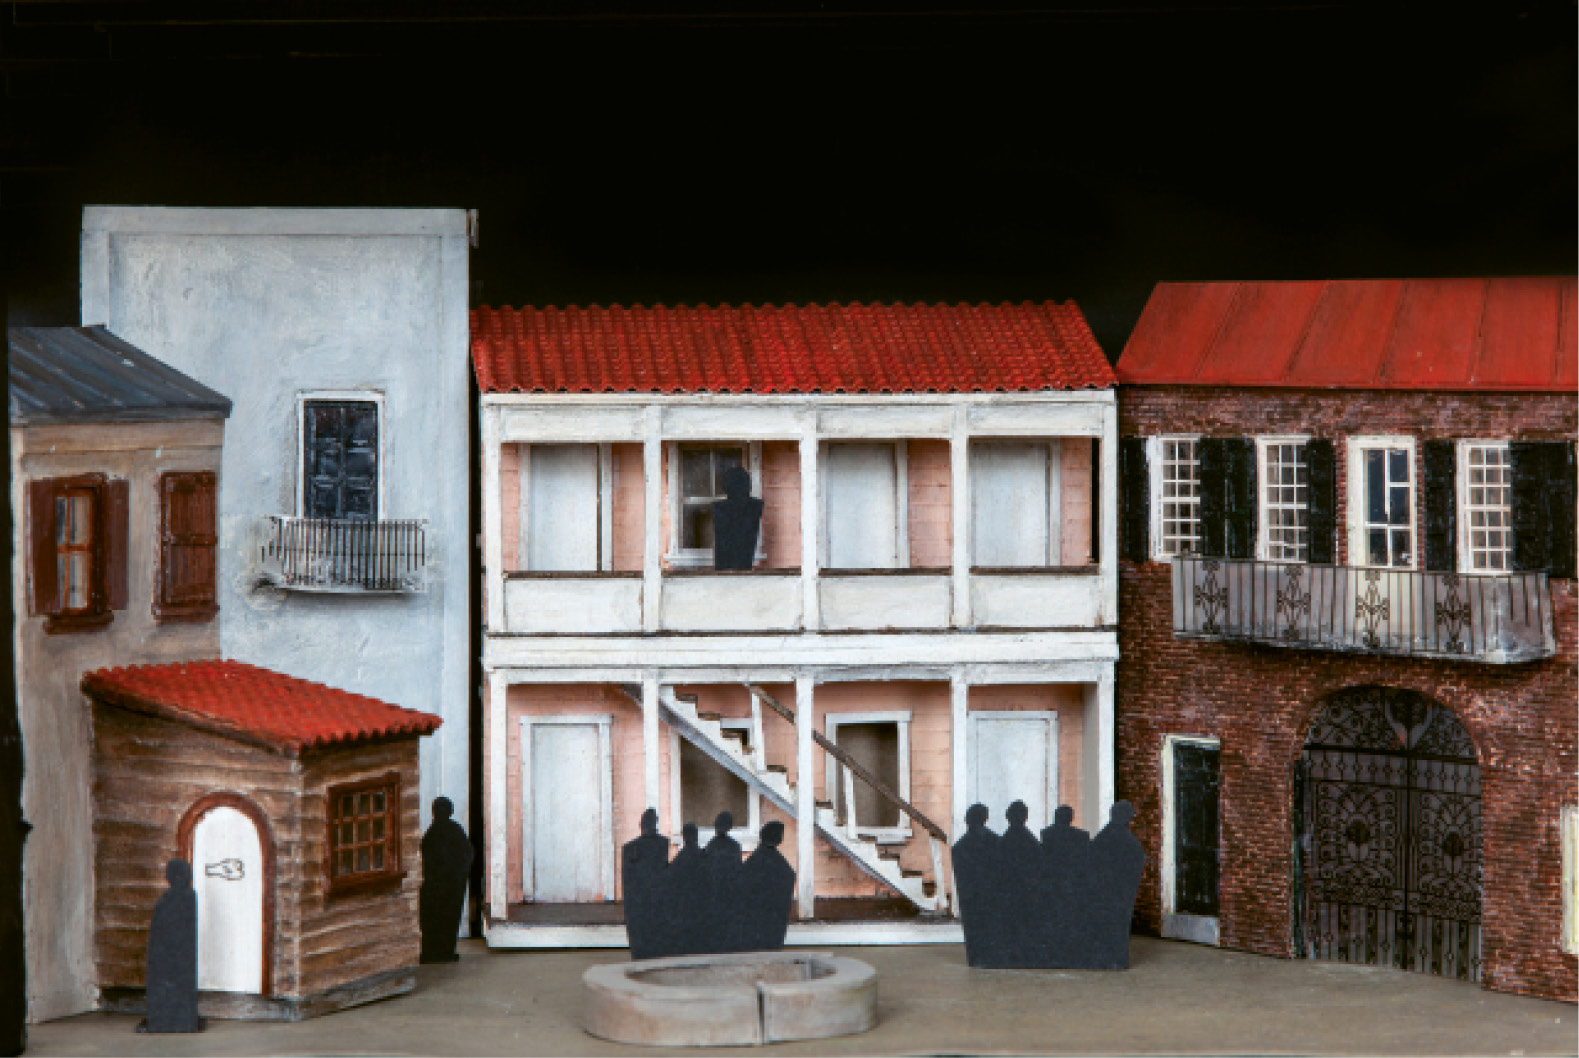 Maquettes for the sets of Porgy and Bess at the Spoleto scene shop demonstrate Green’s direction, including Catfish Row, which will transform decoratively throughout the show as African design elements, such as diamond patterns, are added.